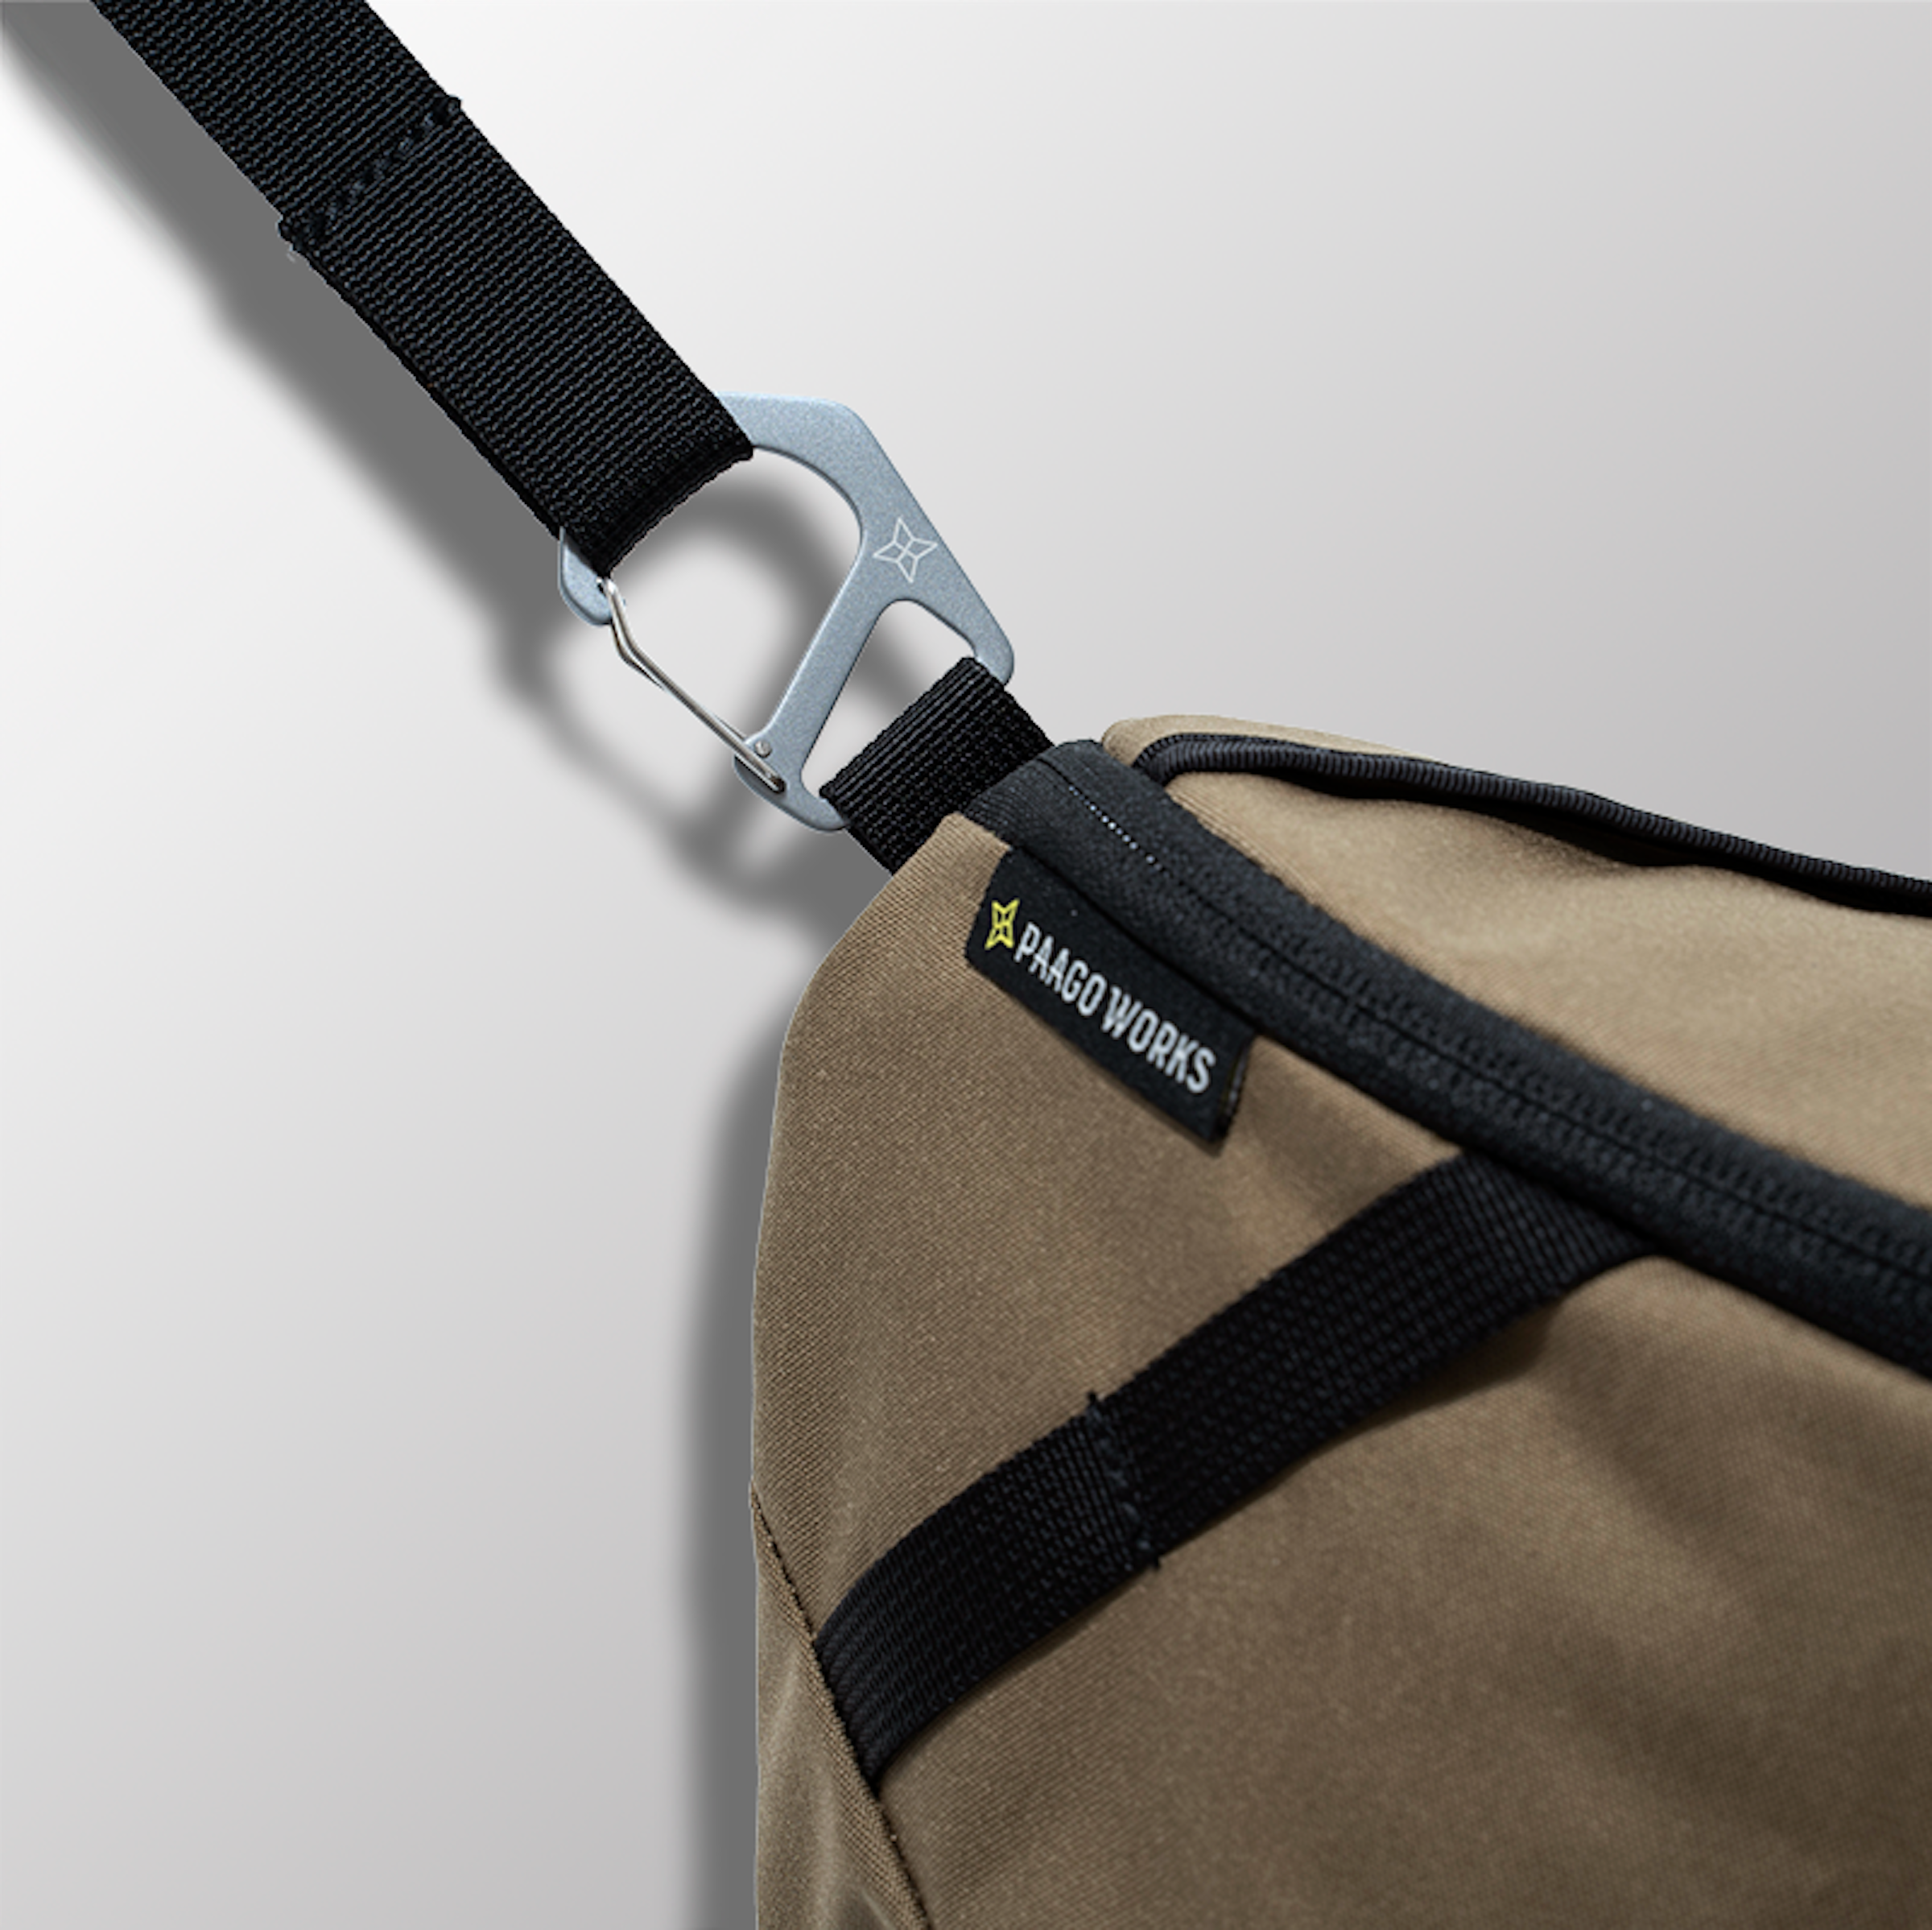 The uniquely designed G-hook is attached to the main body of the bag. It can hang the belt or be hung inside a tent. Whether it's hanging on a chair in the office, hanging on clothes, trousers... indeed, the use cases are endless.